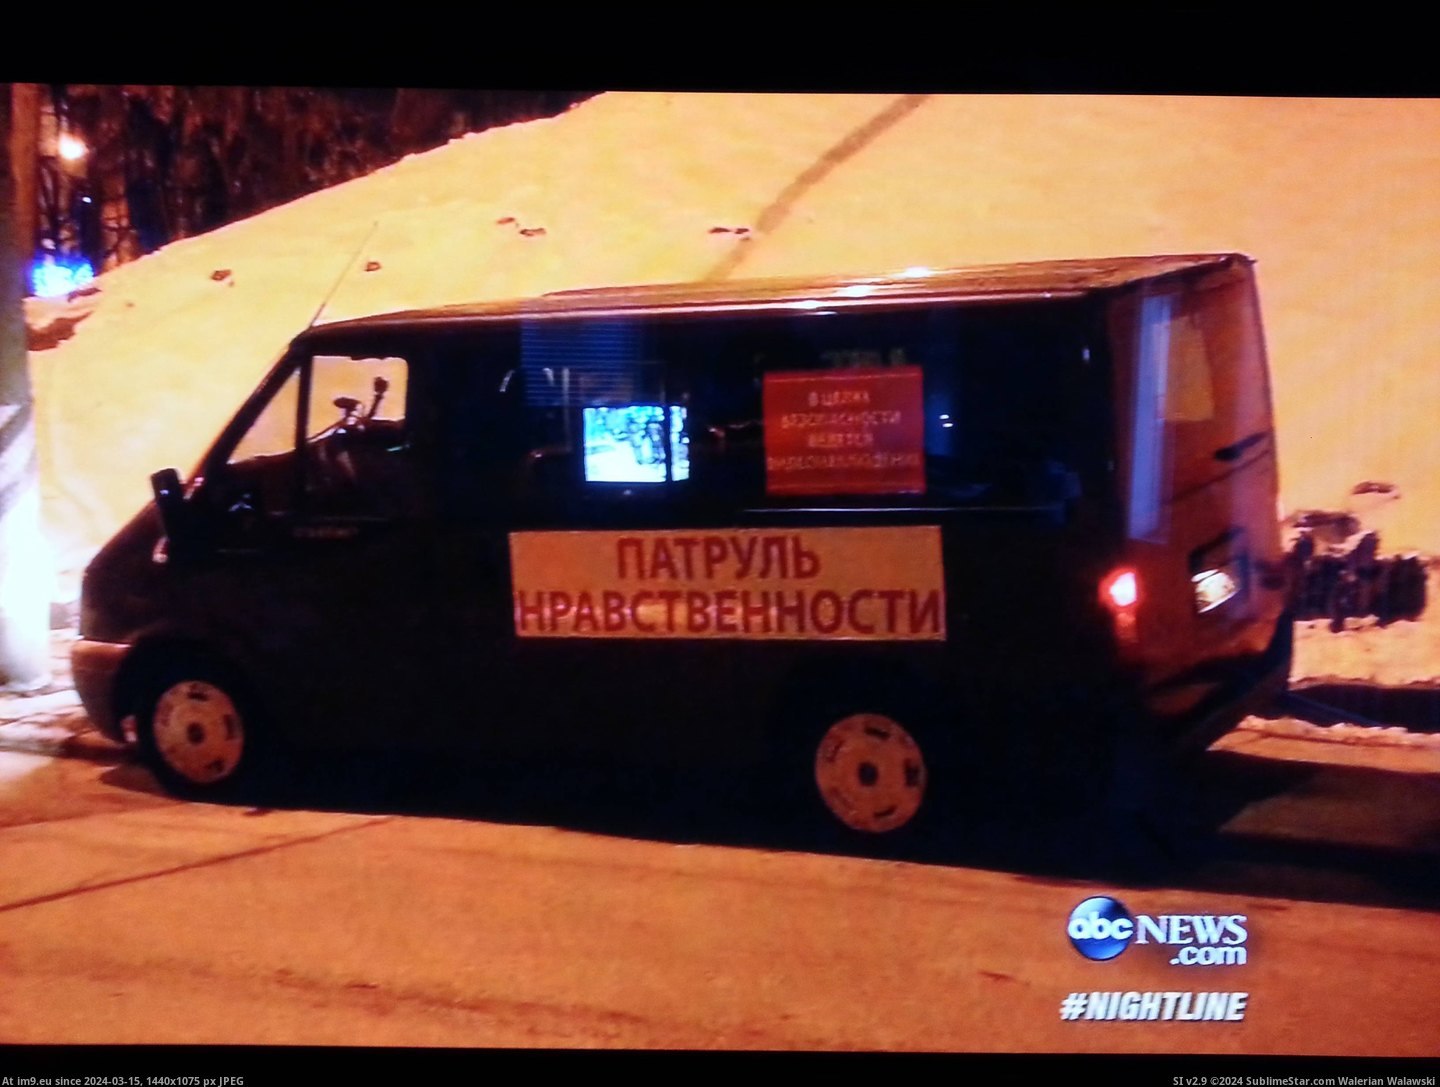 #Wtf #Gay #Night #People #Patrol #Monitors #Morality #Van #Club #Russia #Records [Wtf] Morality patrol van monitors and records all people that come and go in a gay night club in Russia. Pic. (Bild von album My r/WTF favs))